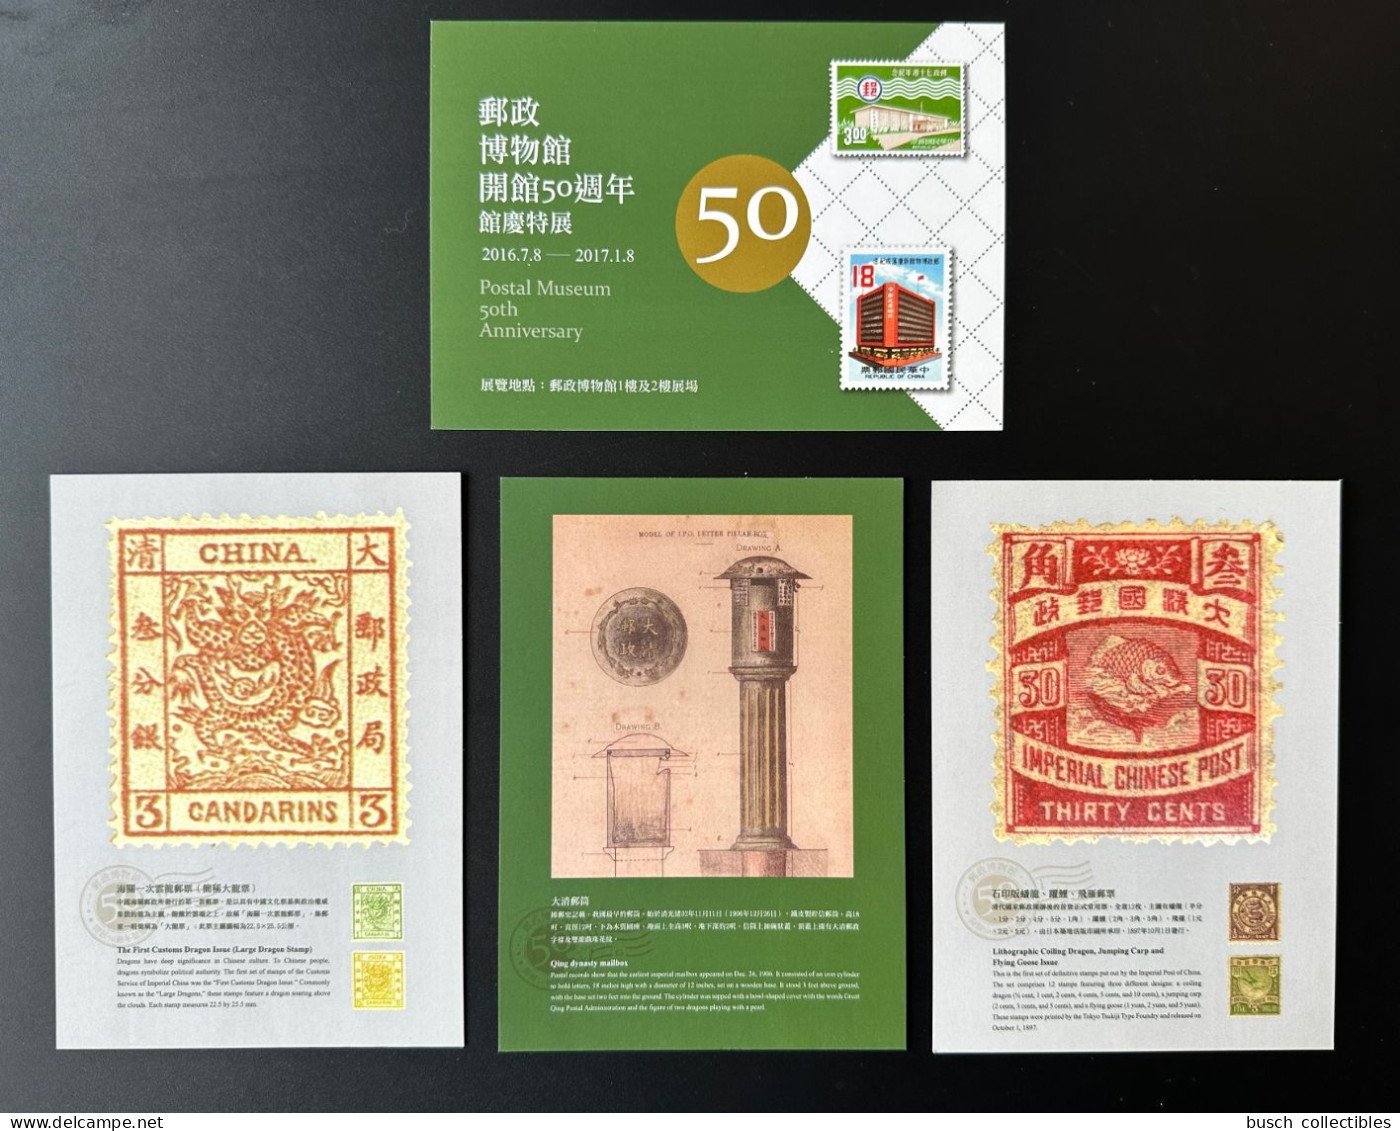 China Chine 2016 / 2017 Postal Museum 50th Anniversary 4 Postcards Postkarten Cartes Postales Musée Postal Postmuseum - Covers & Documents